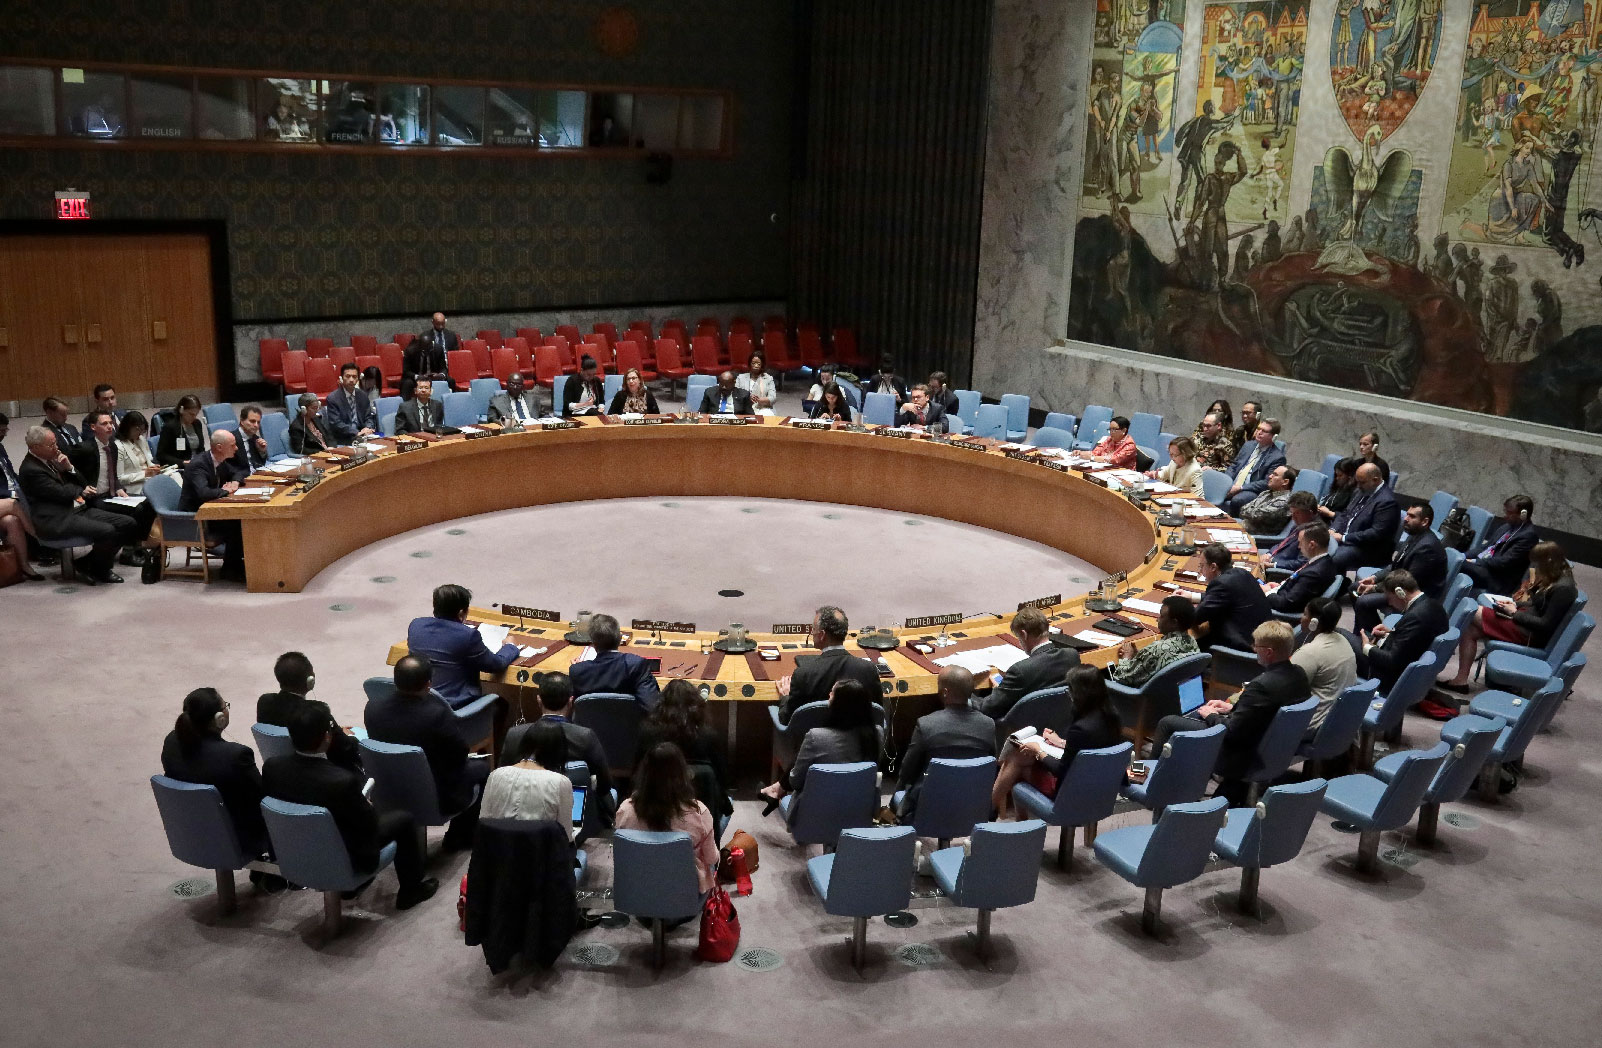 Meeting of the UN Security Council